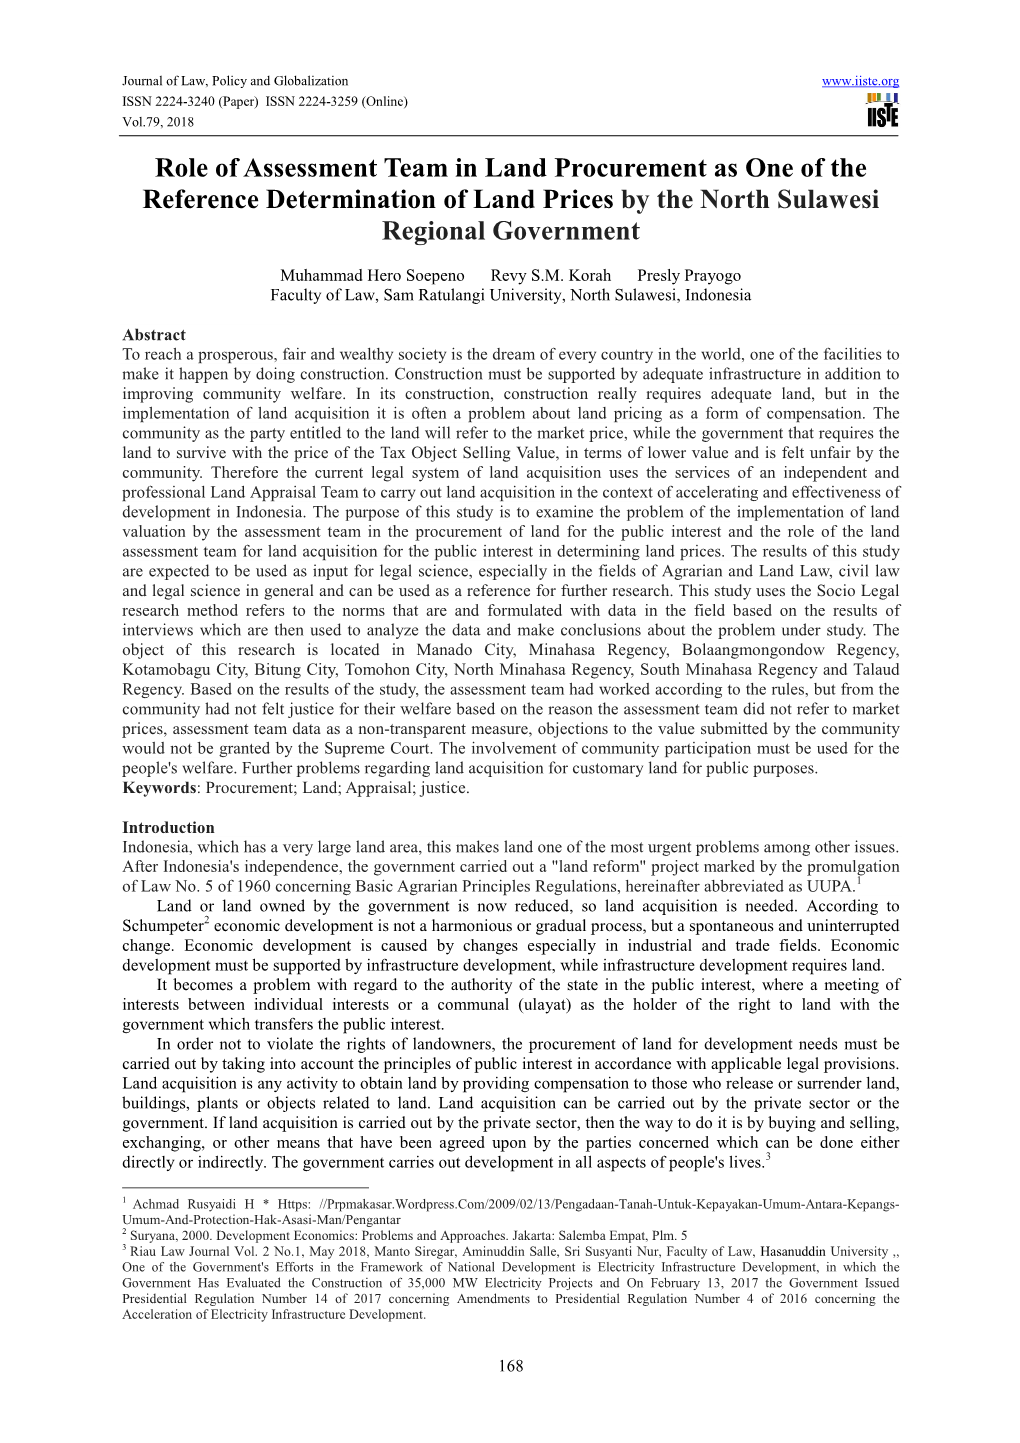 Role of Assessment Team in Land Procurement As One of the Reference Determination of Land Prices by the North Sulawesi Regional Government